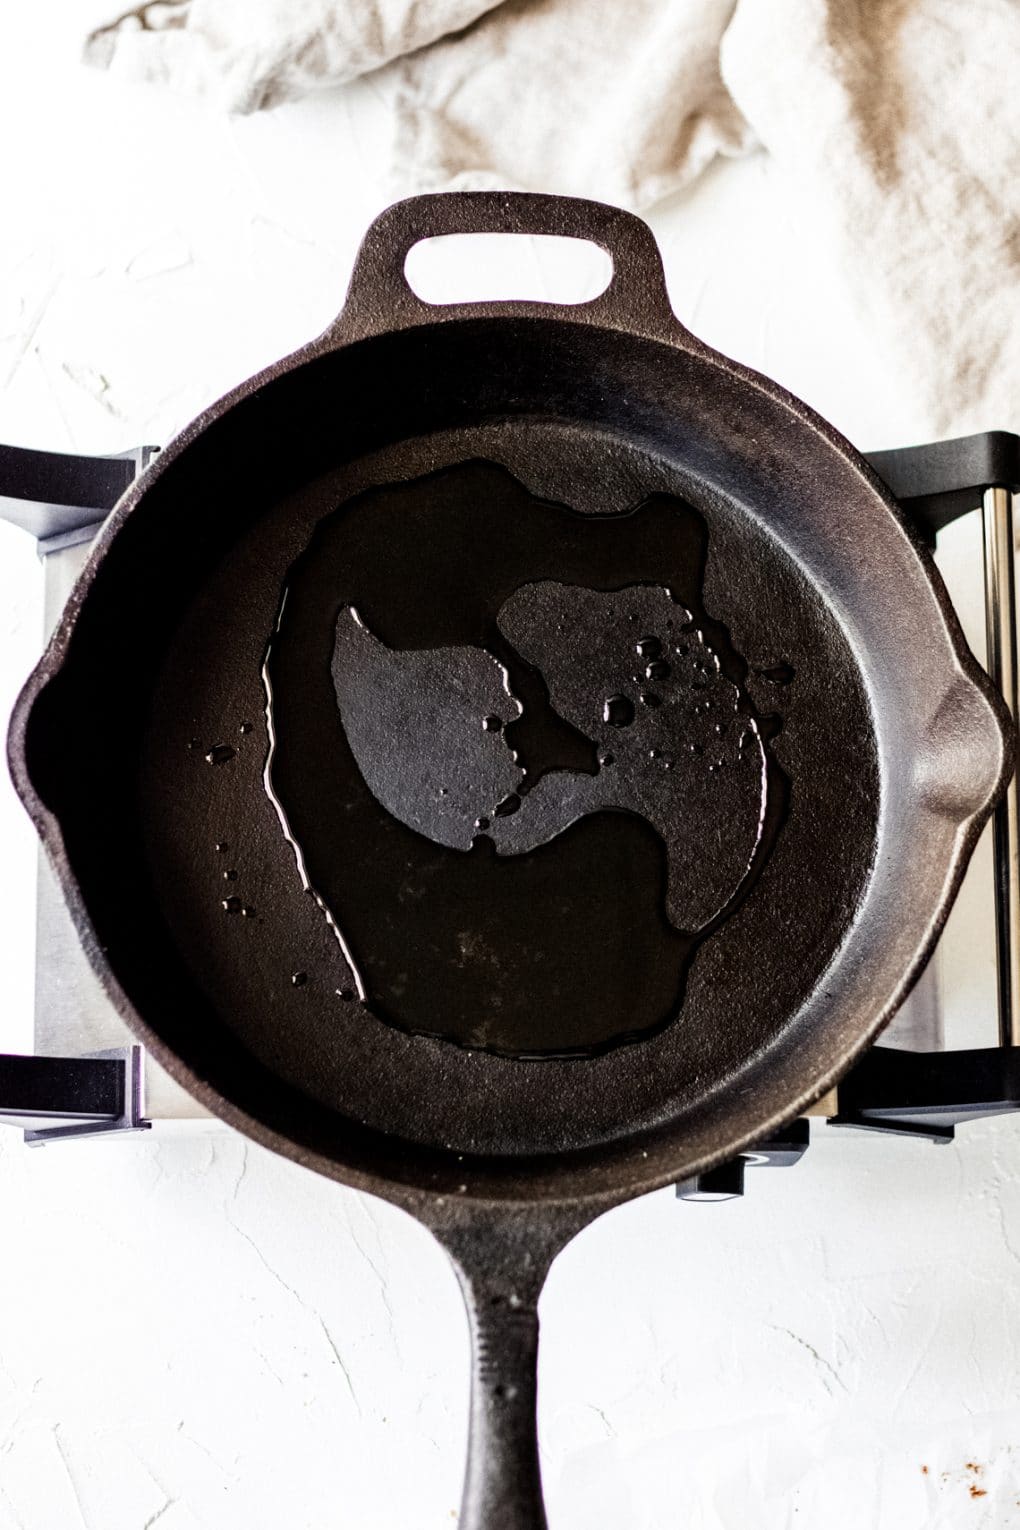 oil heating up in a cast iron skillet